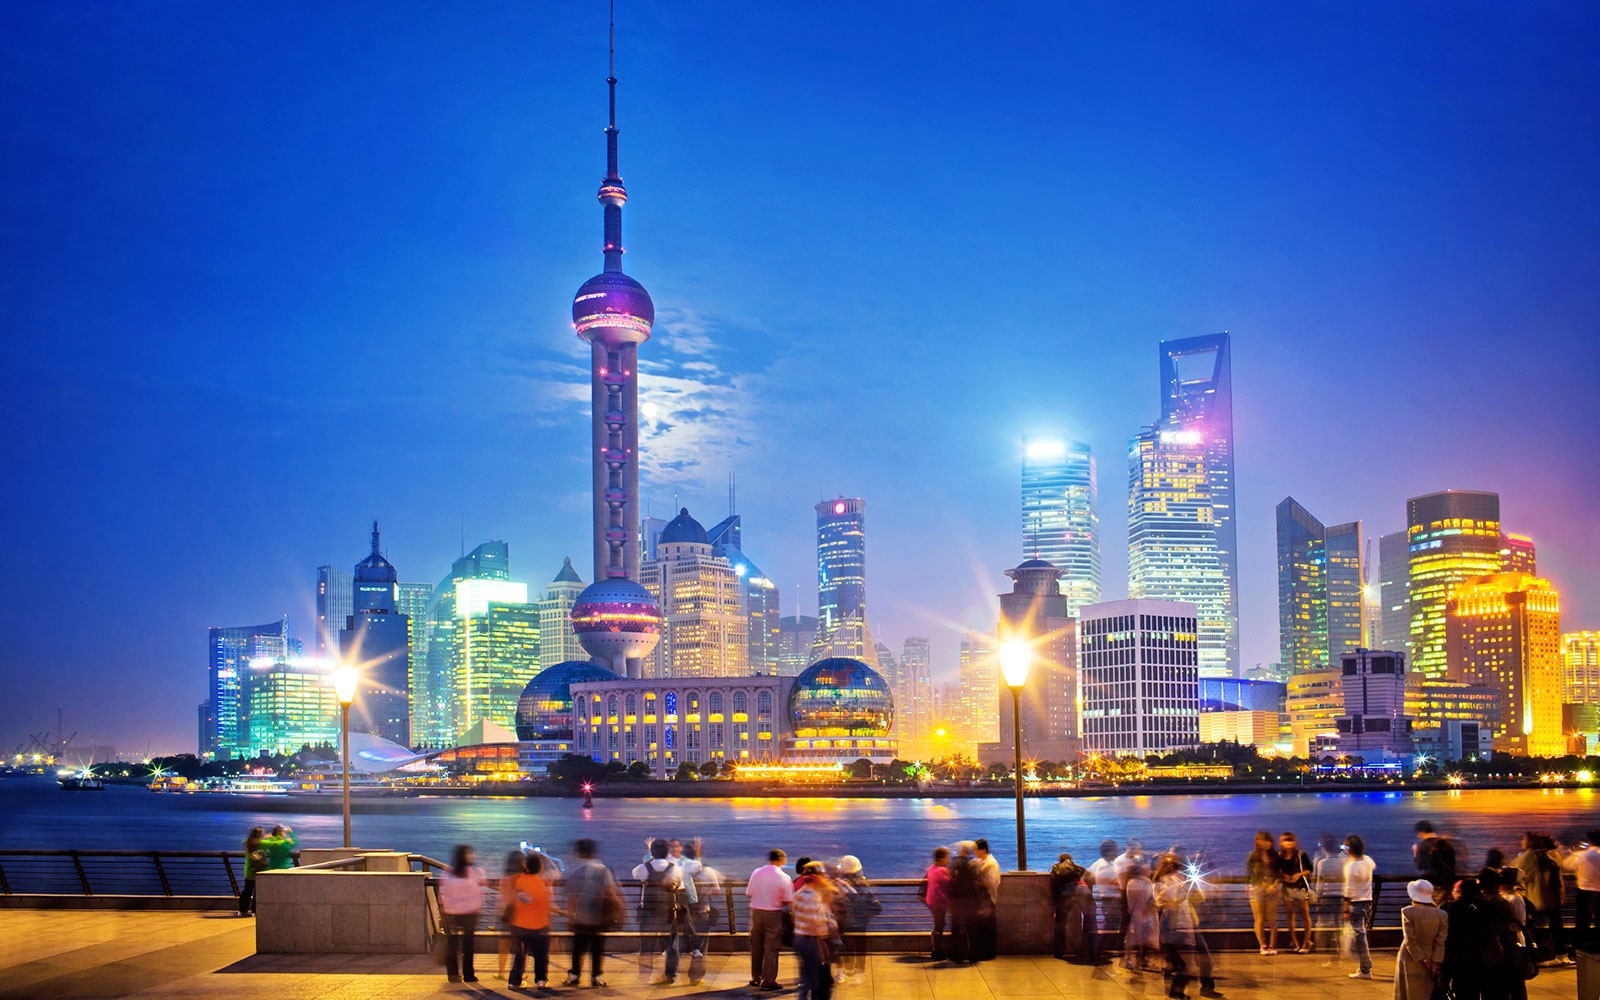 Amazing Shanghai Pictures & Backgrounds